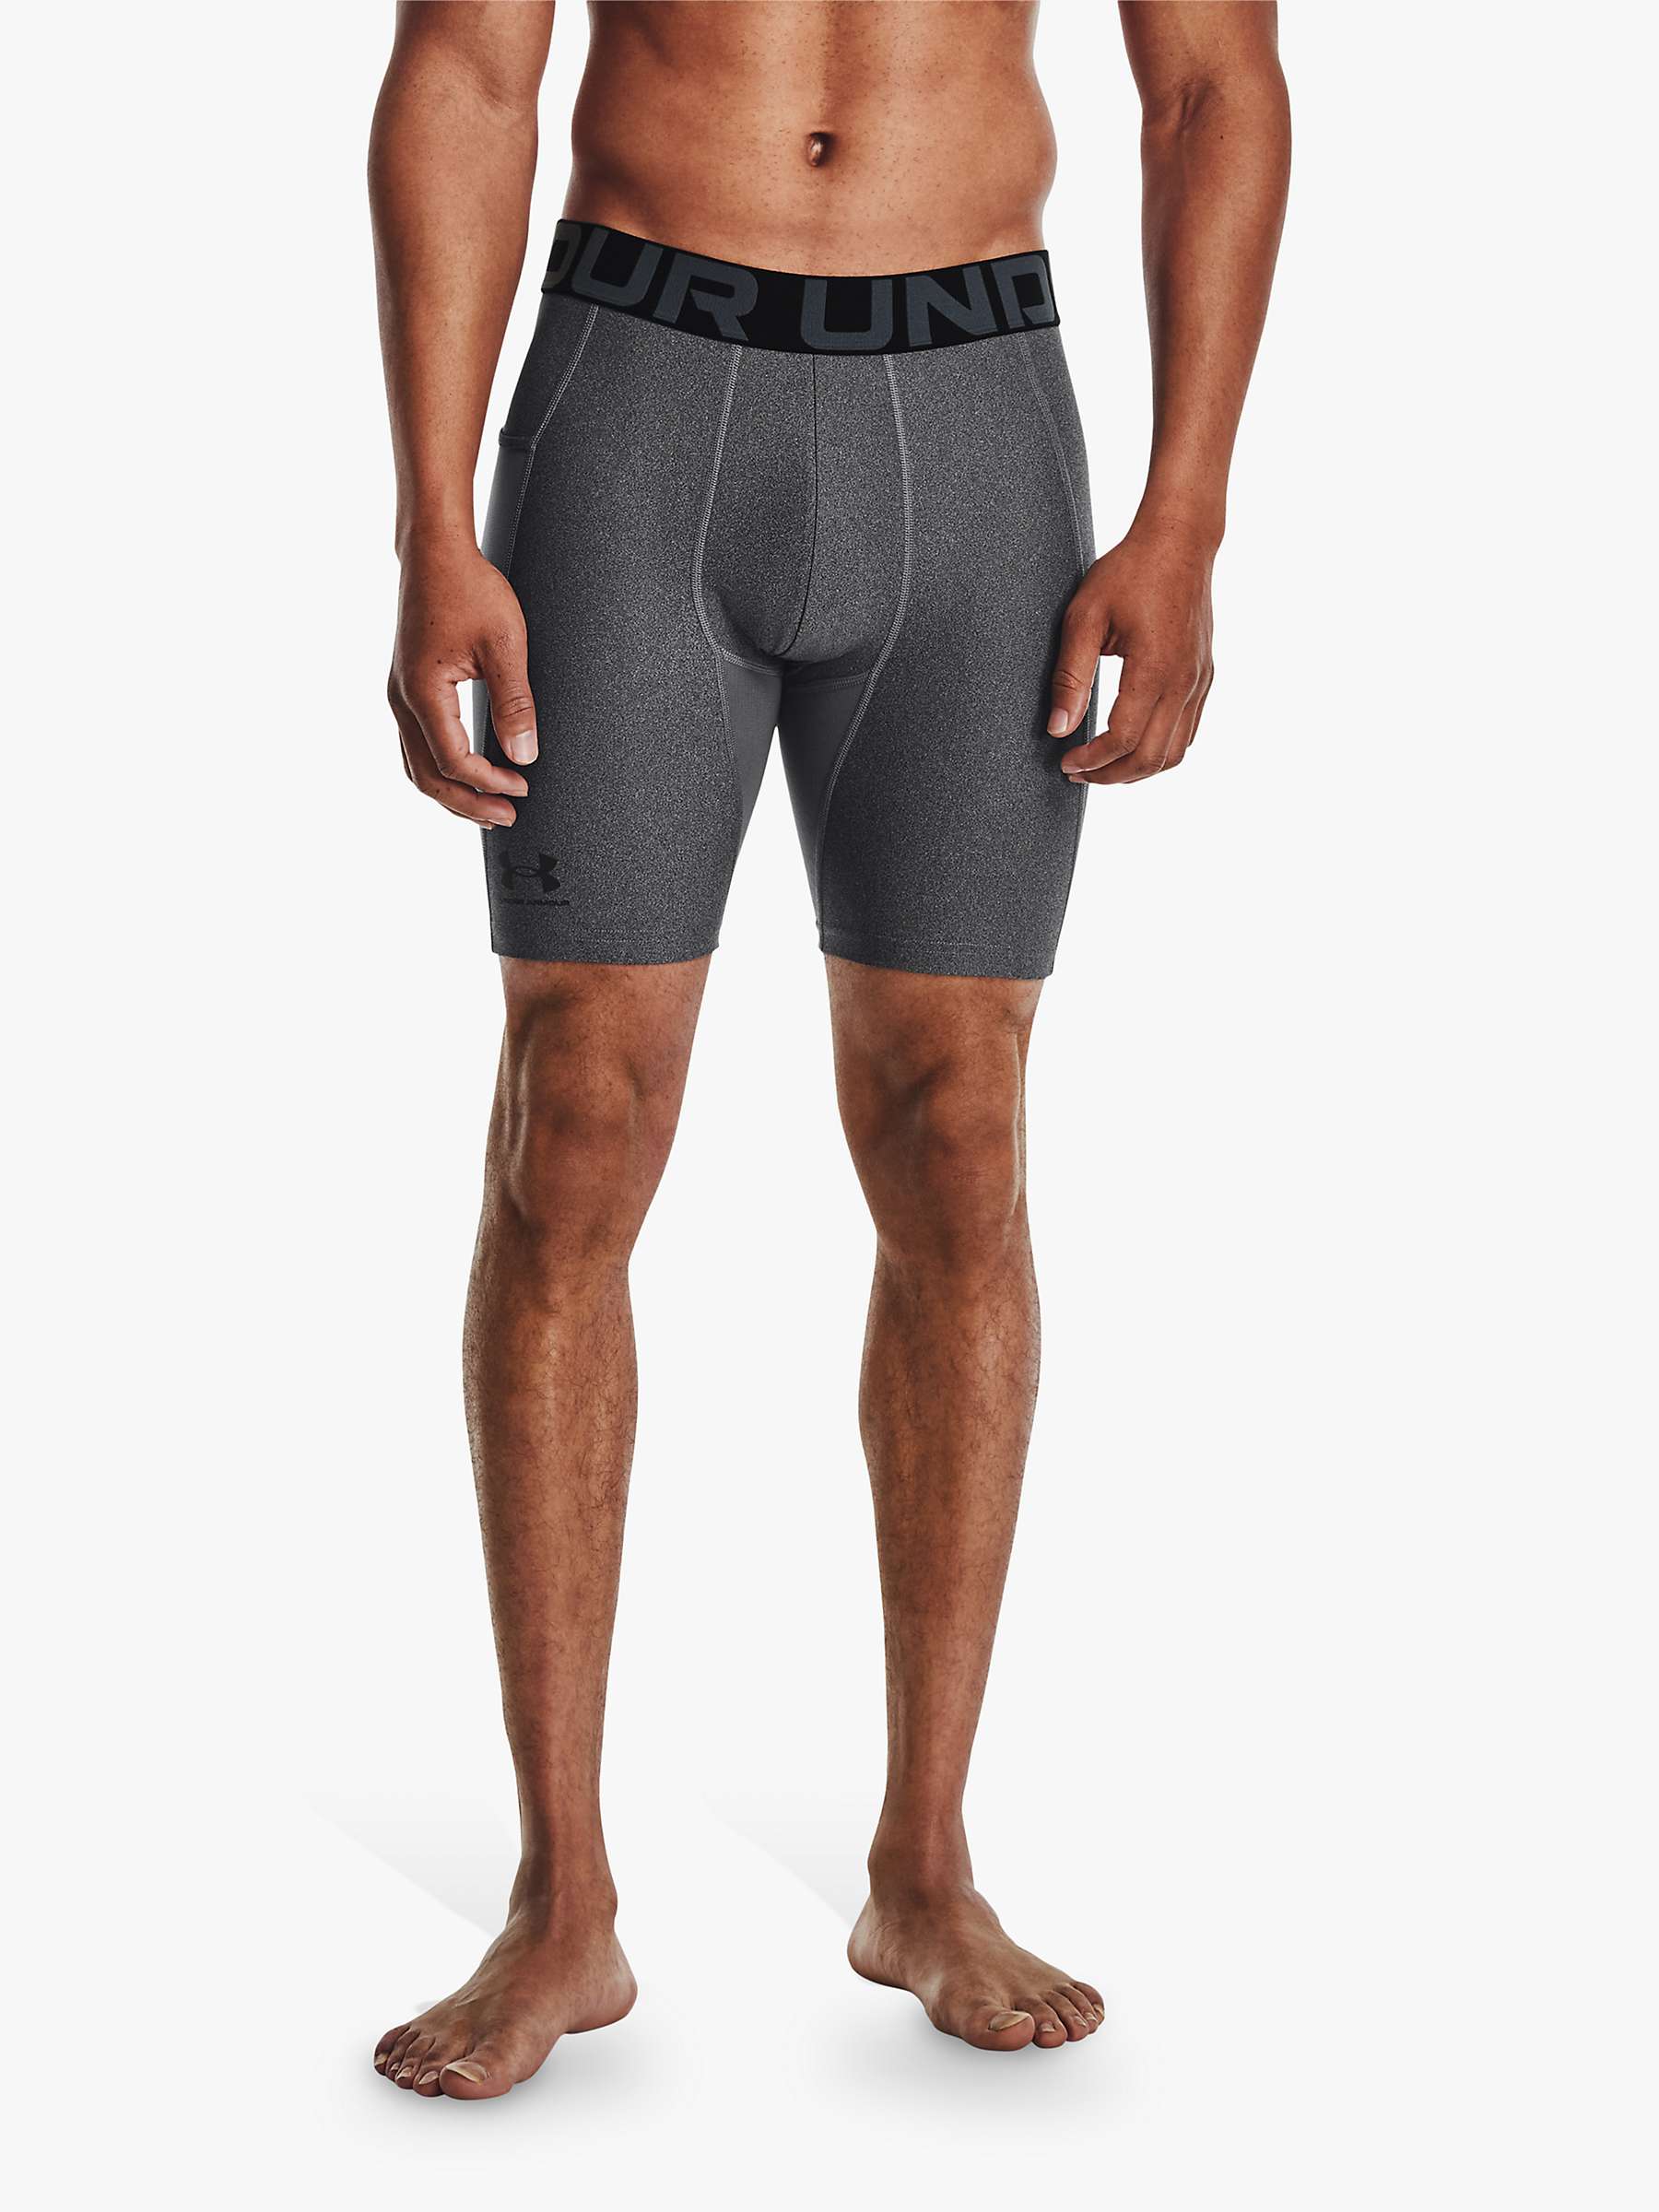 Under Armour HeatGear Armour Compression Shorts, Carbon Heather at